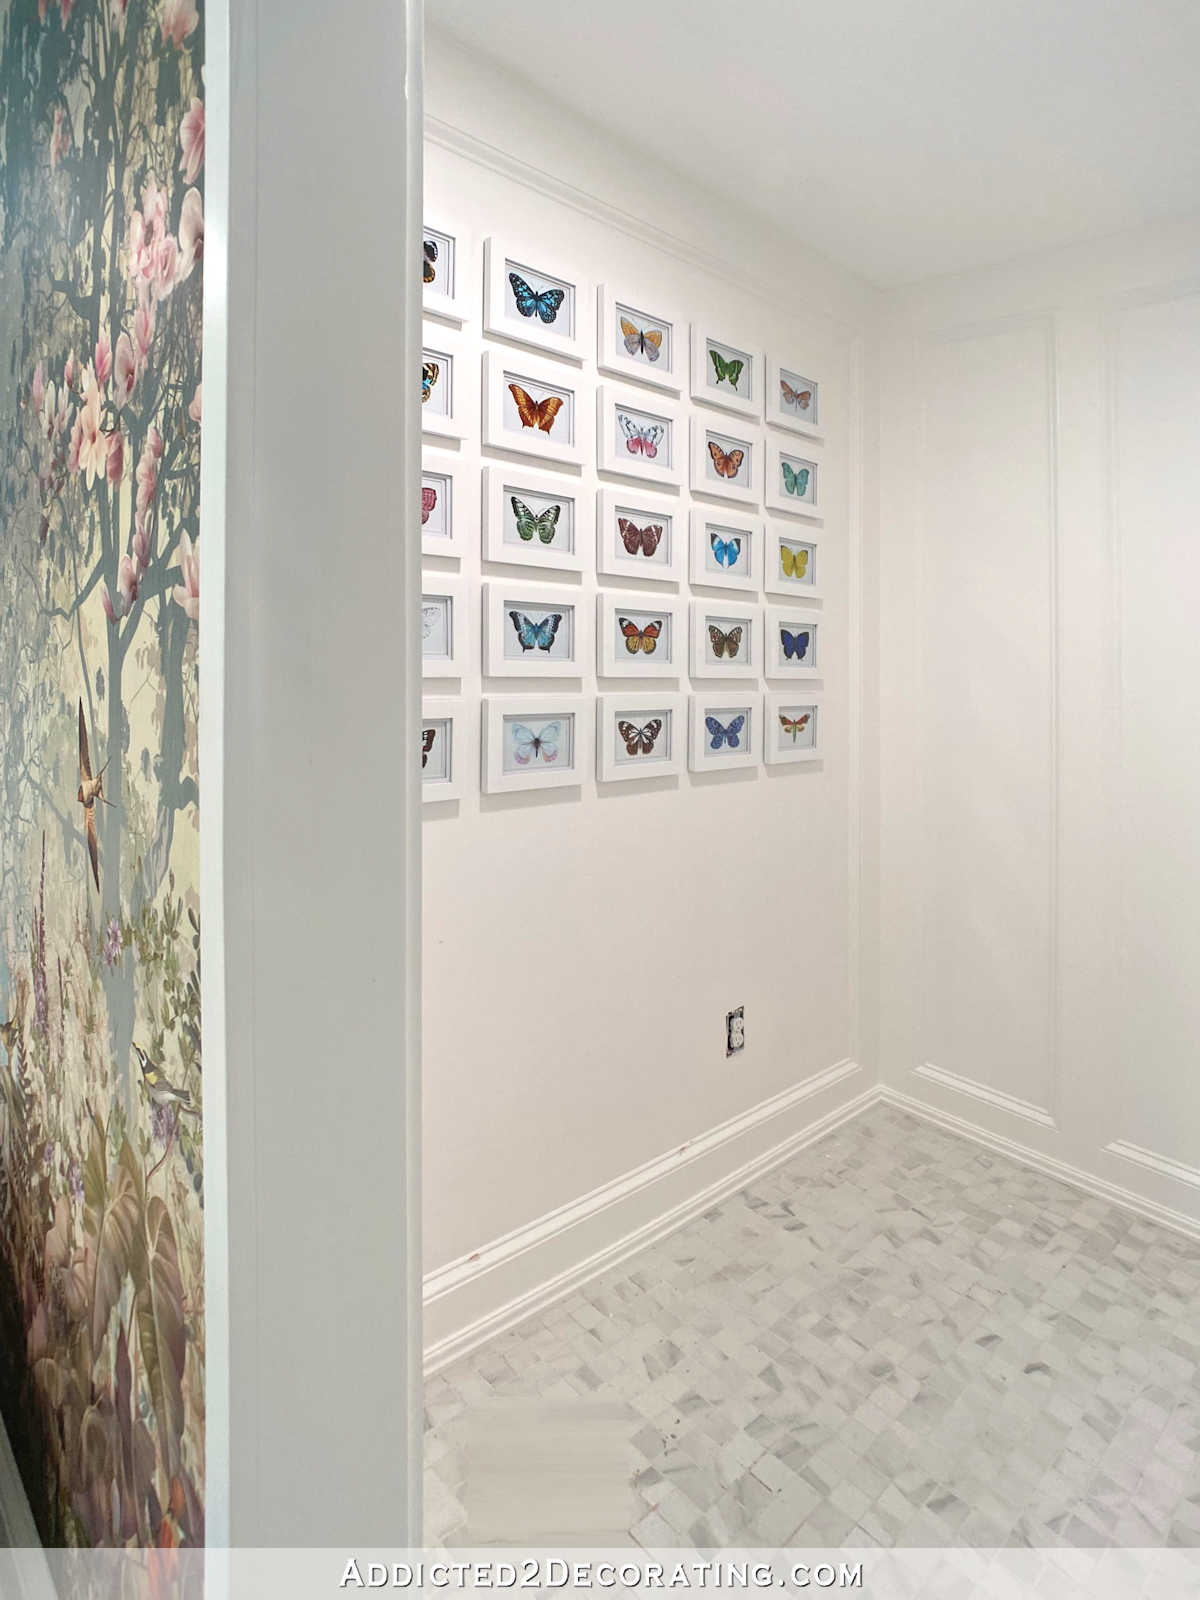 Grid Gallery Wall Using 25 Free Butterfly Illustrations